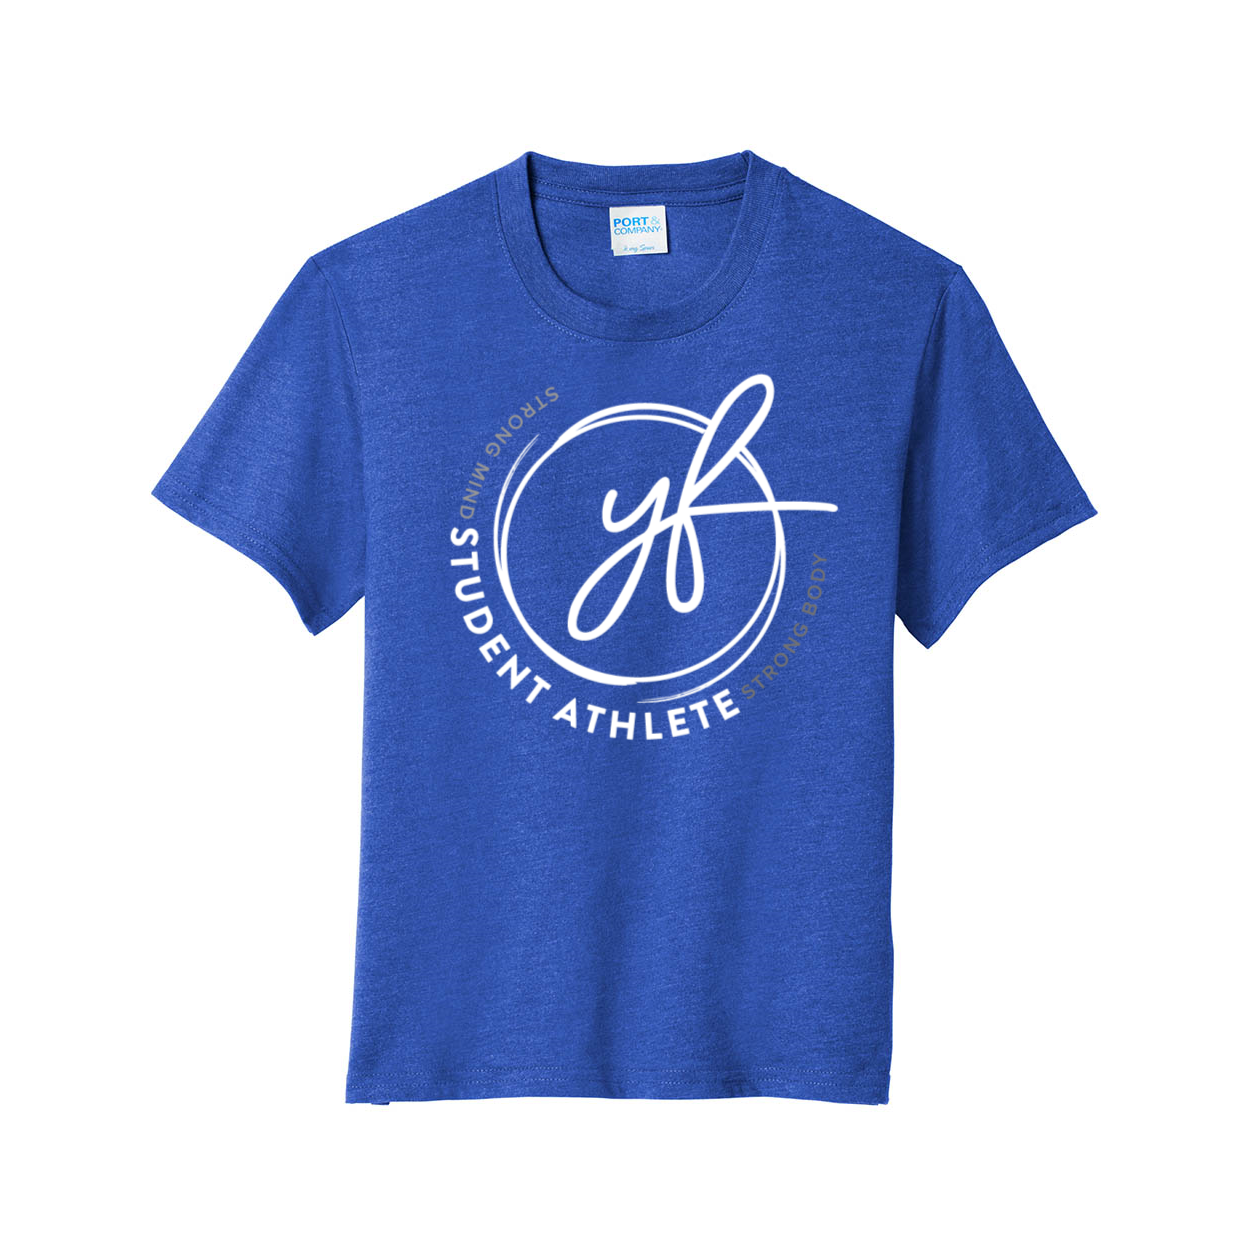 YOLO FITTED STUDENT ATHLETE SHIRT YOUTH SIZES - Yolofitted